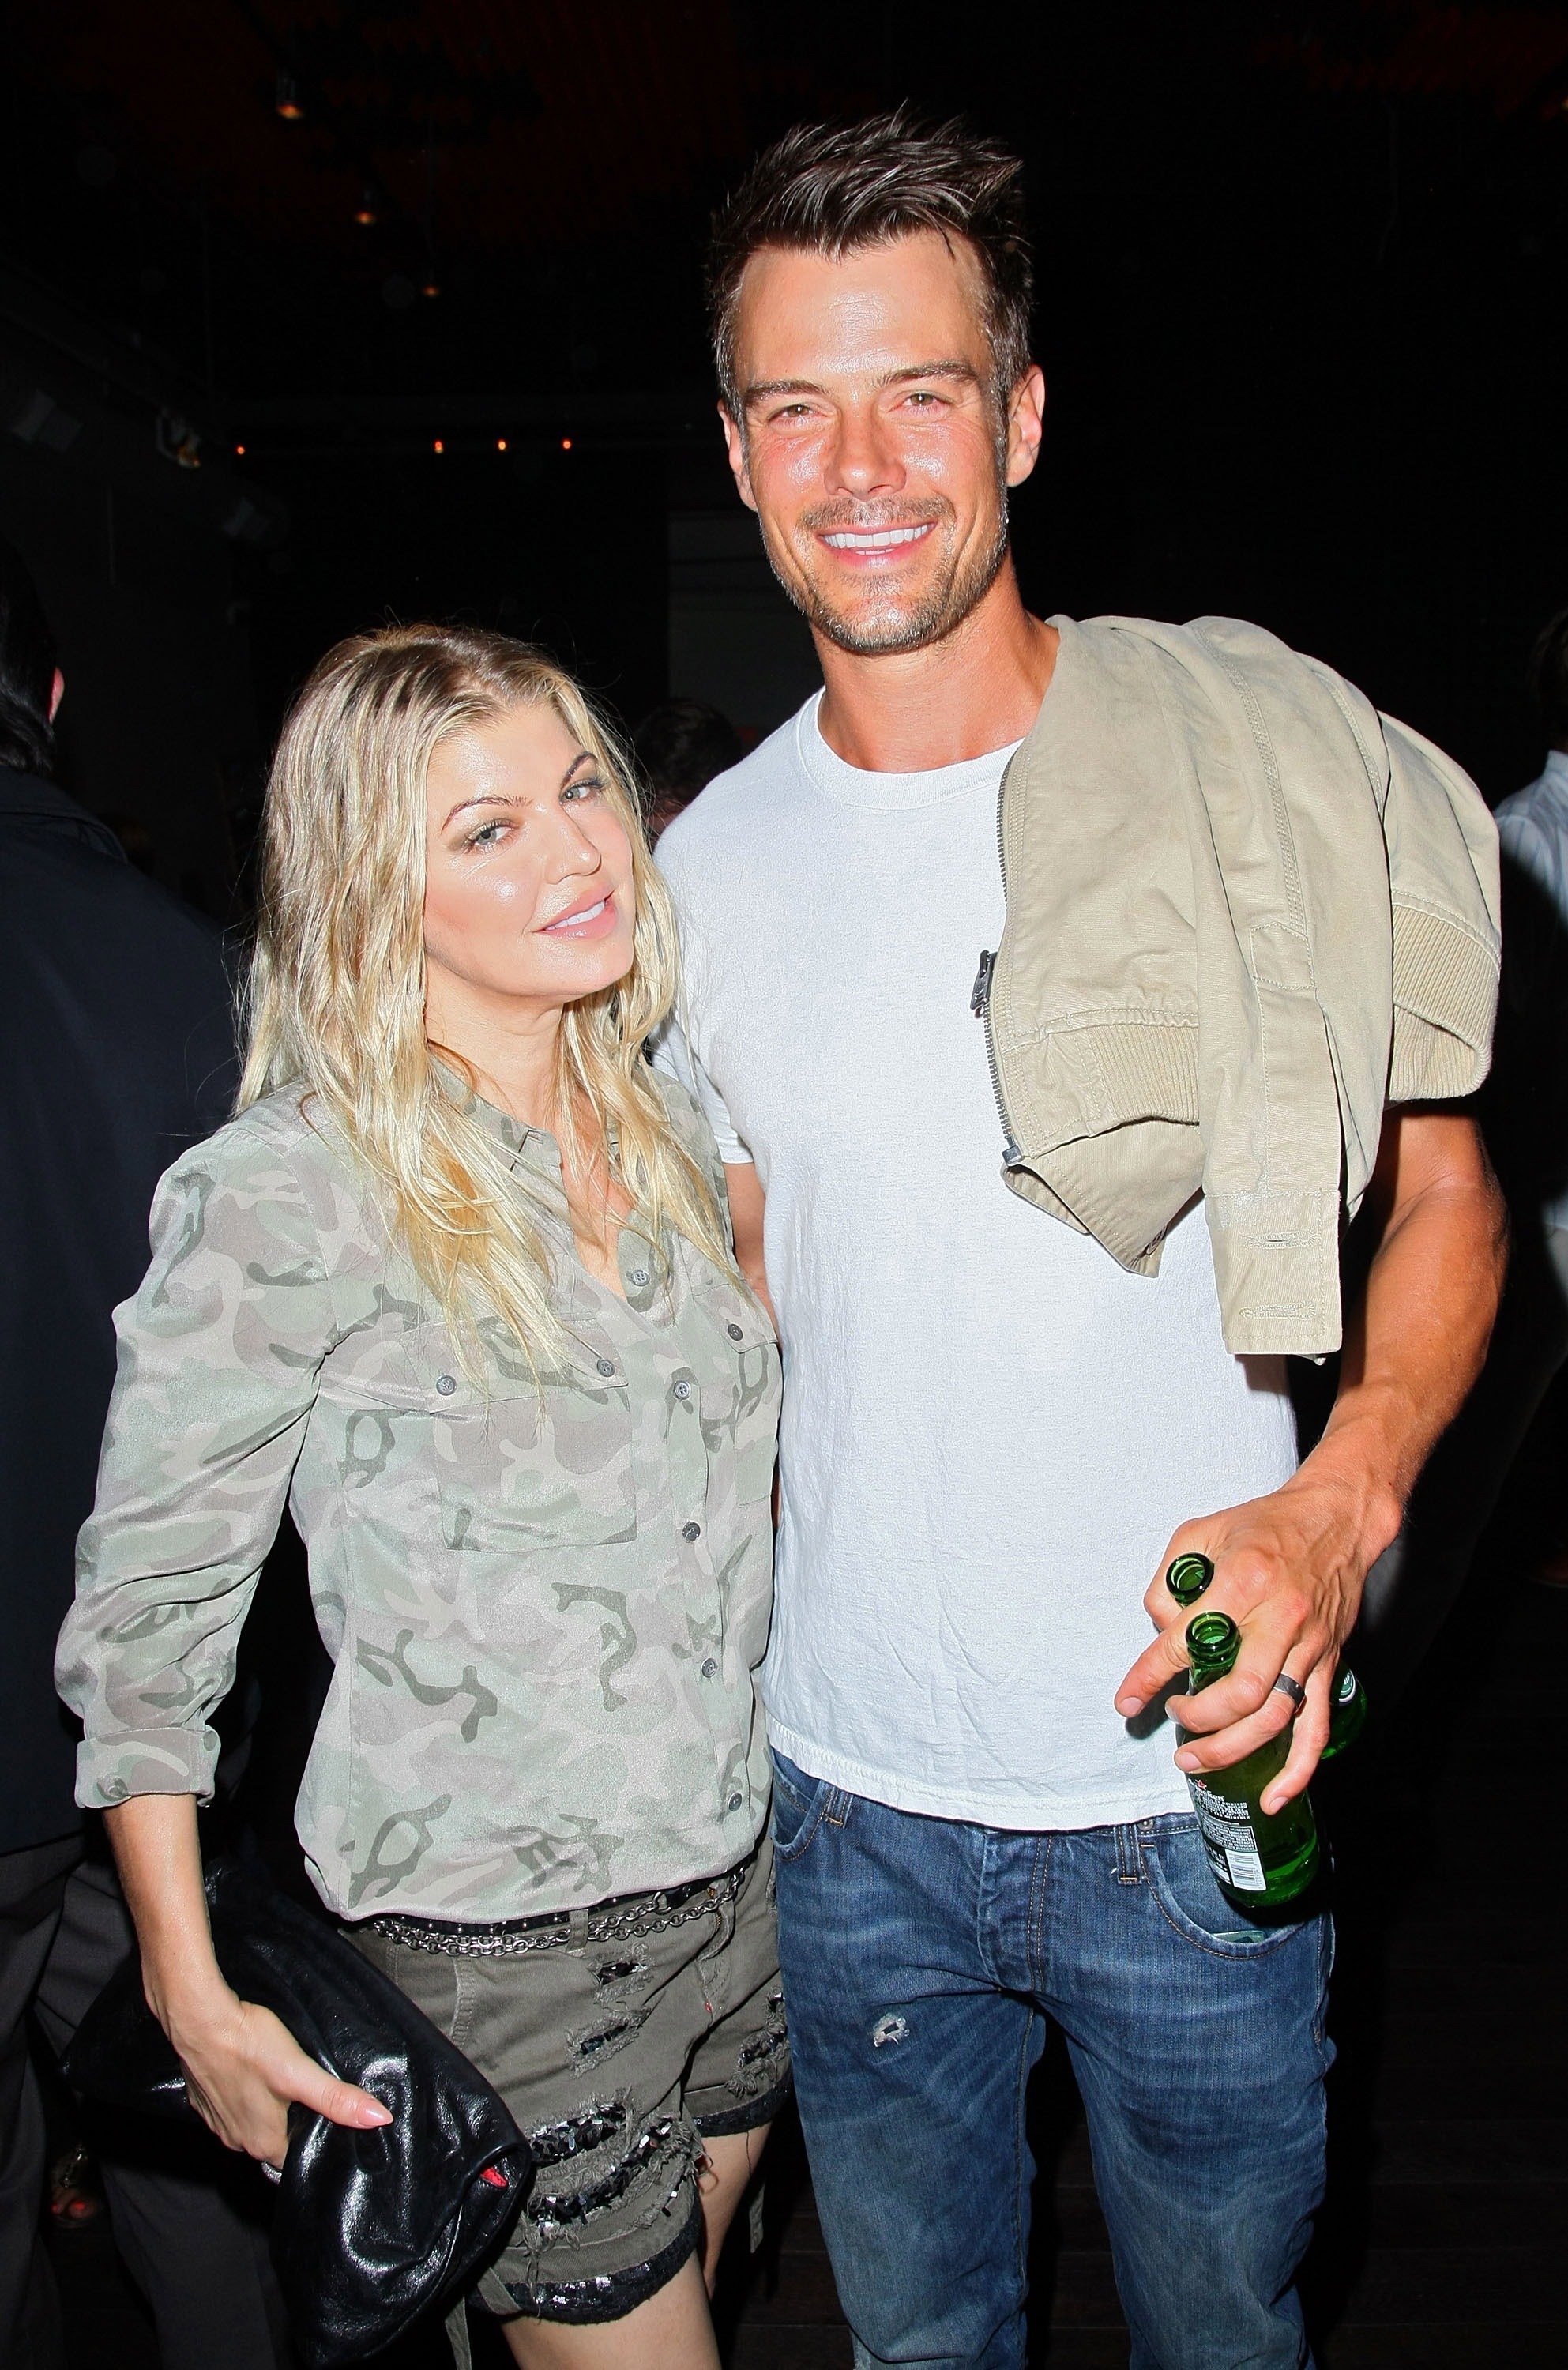 Fergie and actor Josh Duhamel attend the screening of "Alekesam" at Sonos Studio on August 22, 2012, in Los Angeles, California. | Source: Getty Images.